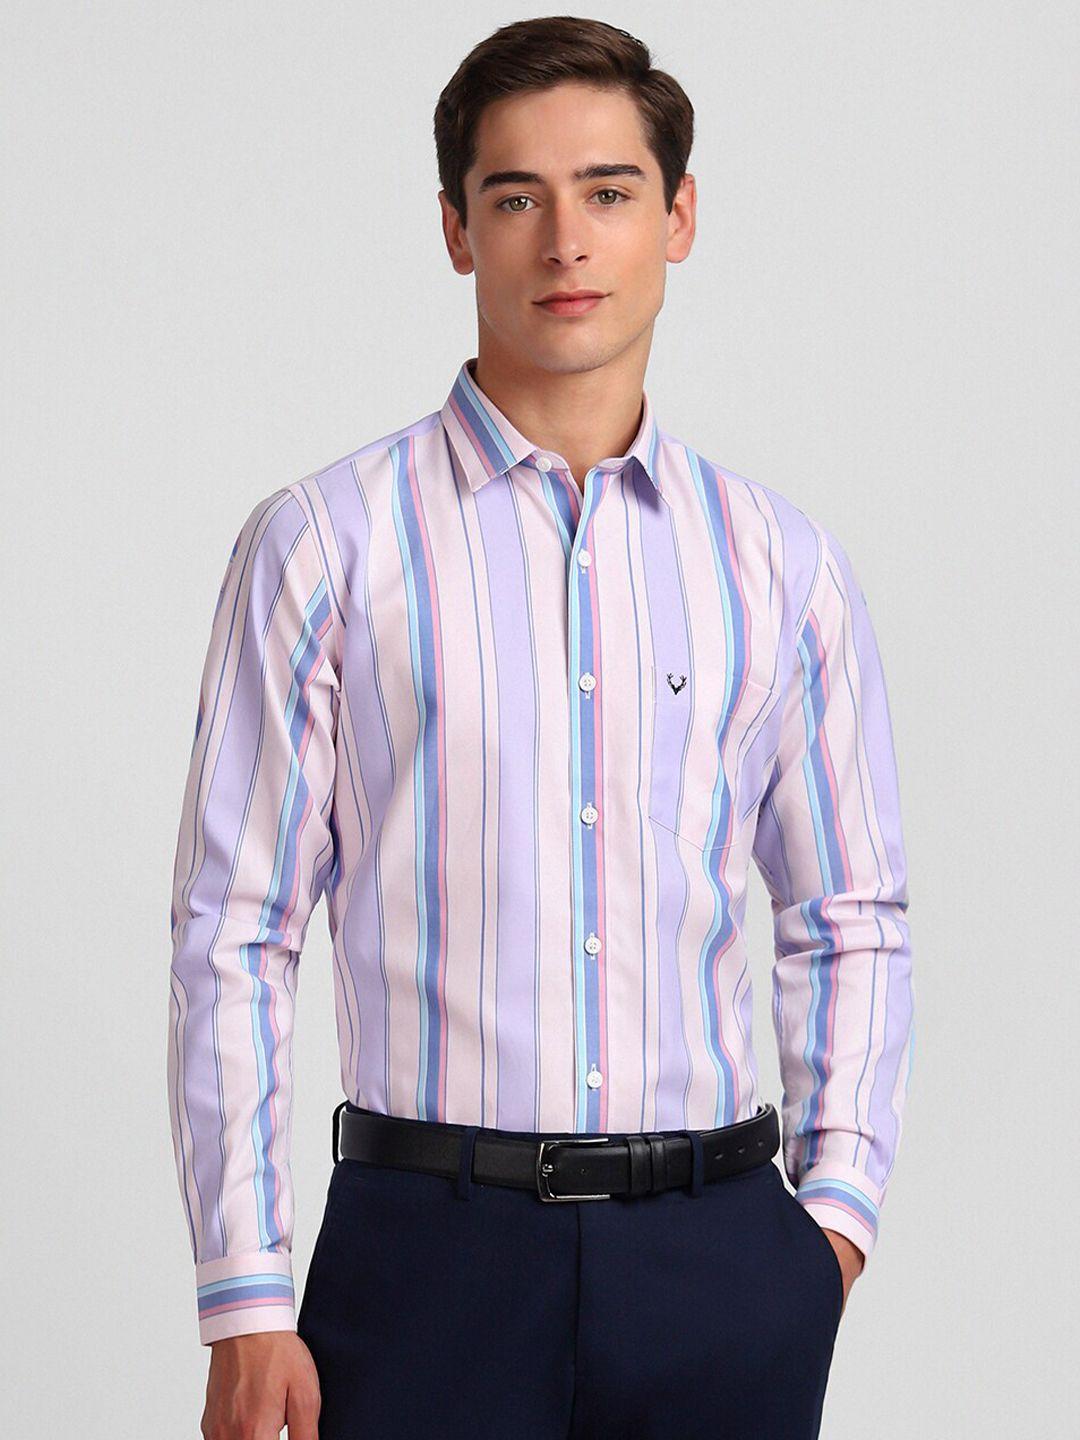 allen solly slim fit opaque striped pure cotton casual shirt